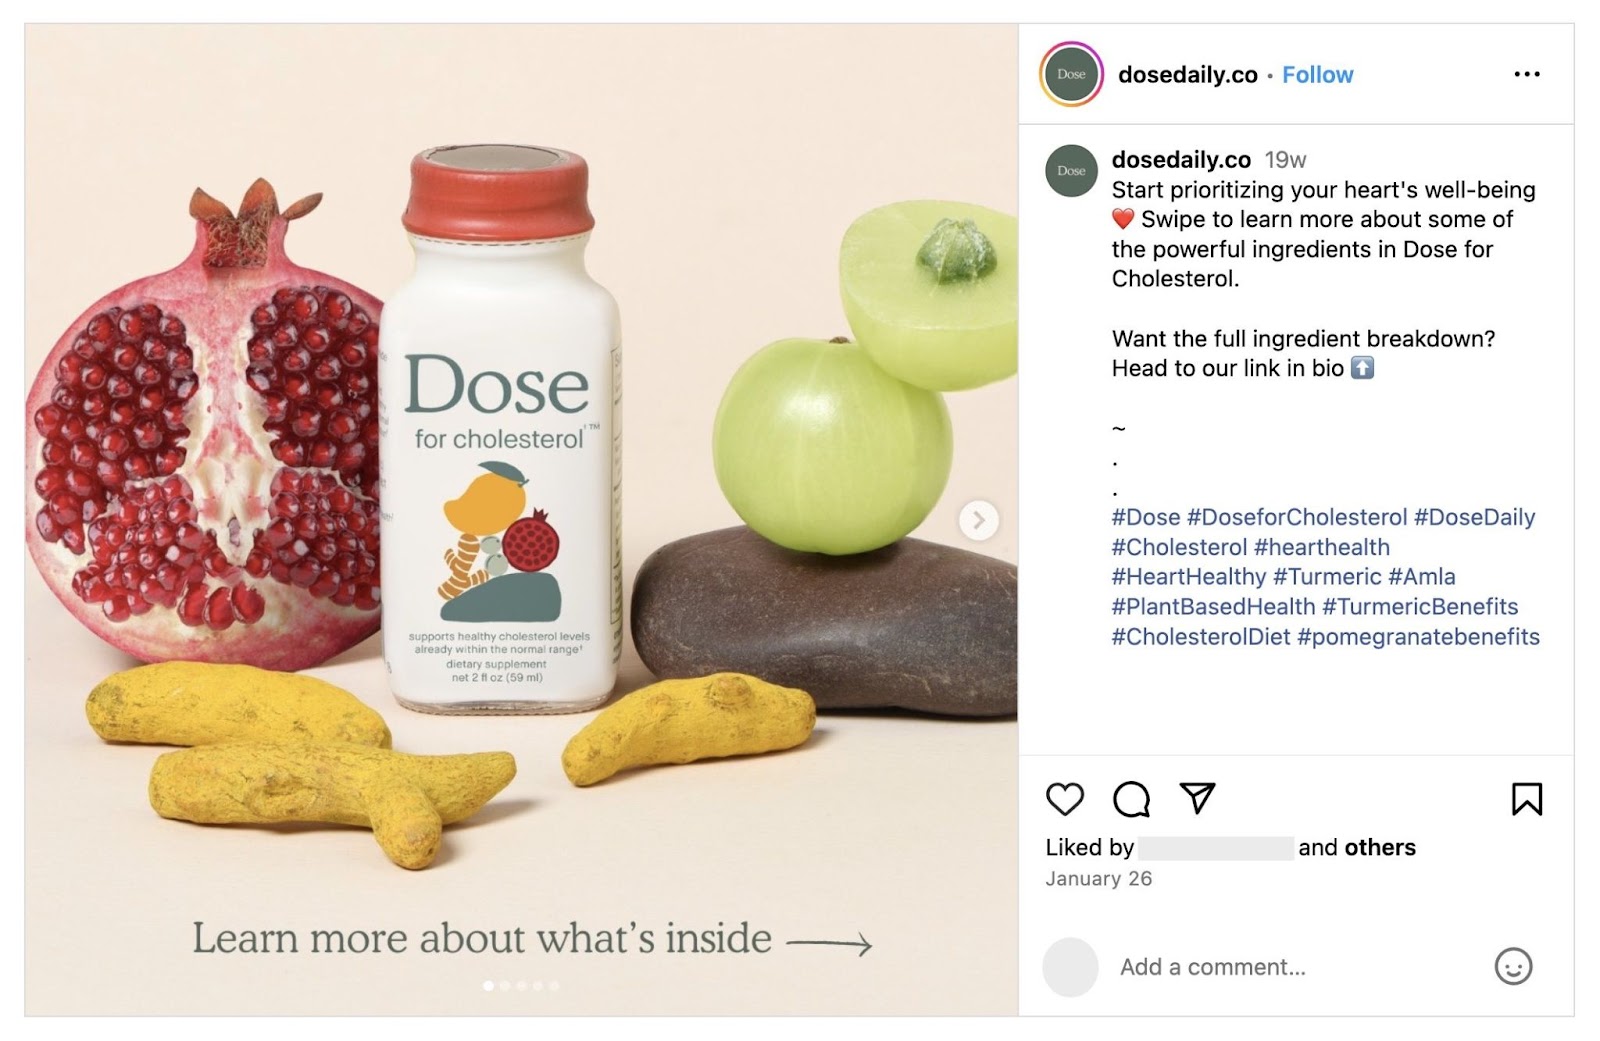 Instagram post by Dose Daily using engaging product images to capture attention.